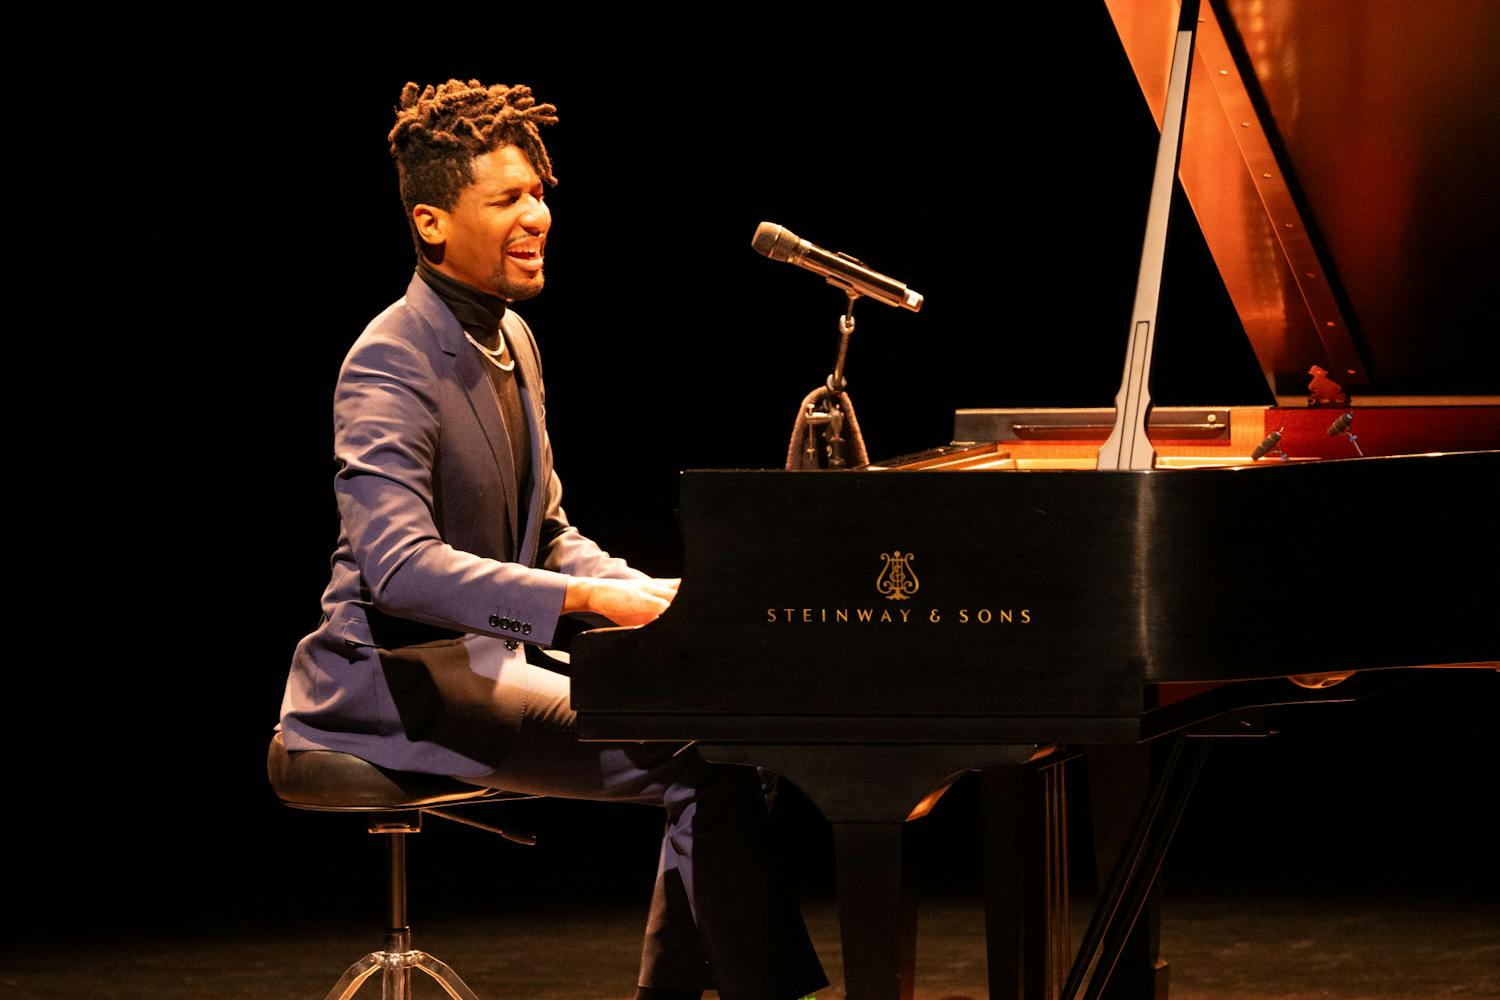 Batiste deviated from the stiff formality of classical music performances, encouraging the audience to treat the concert as a “living room recital.”&nbsp;